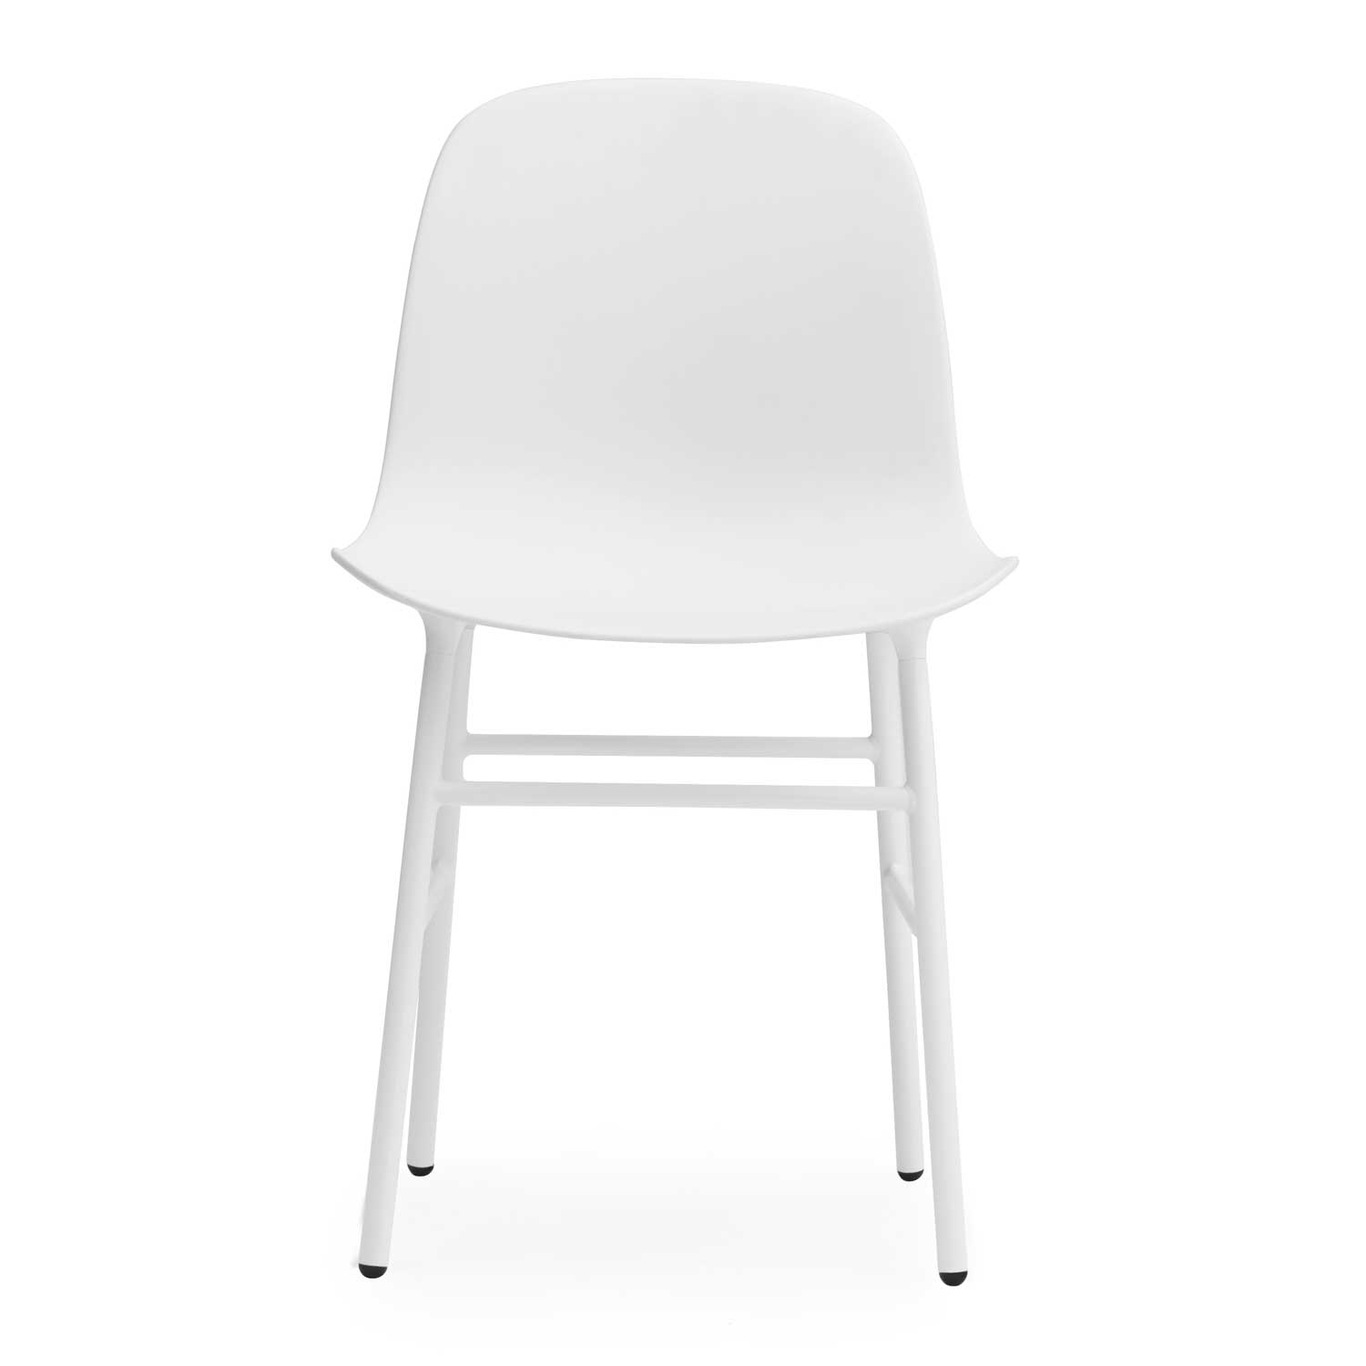 Form Chair Steel Frame, White